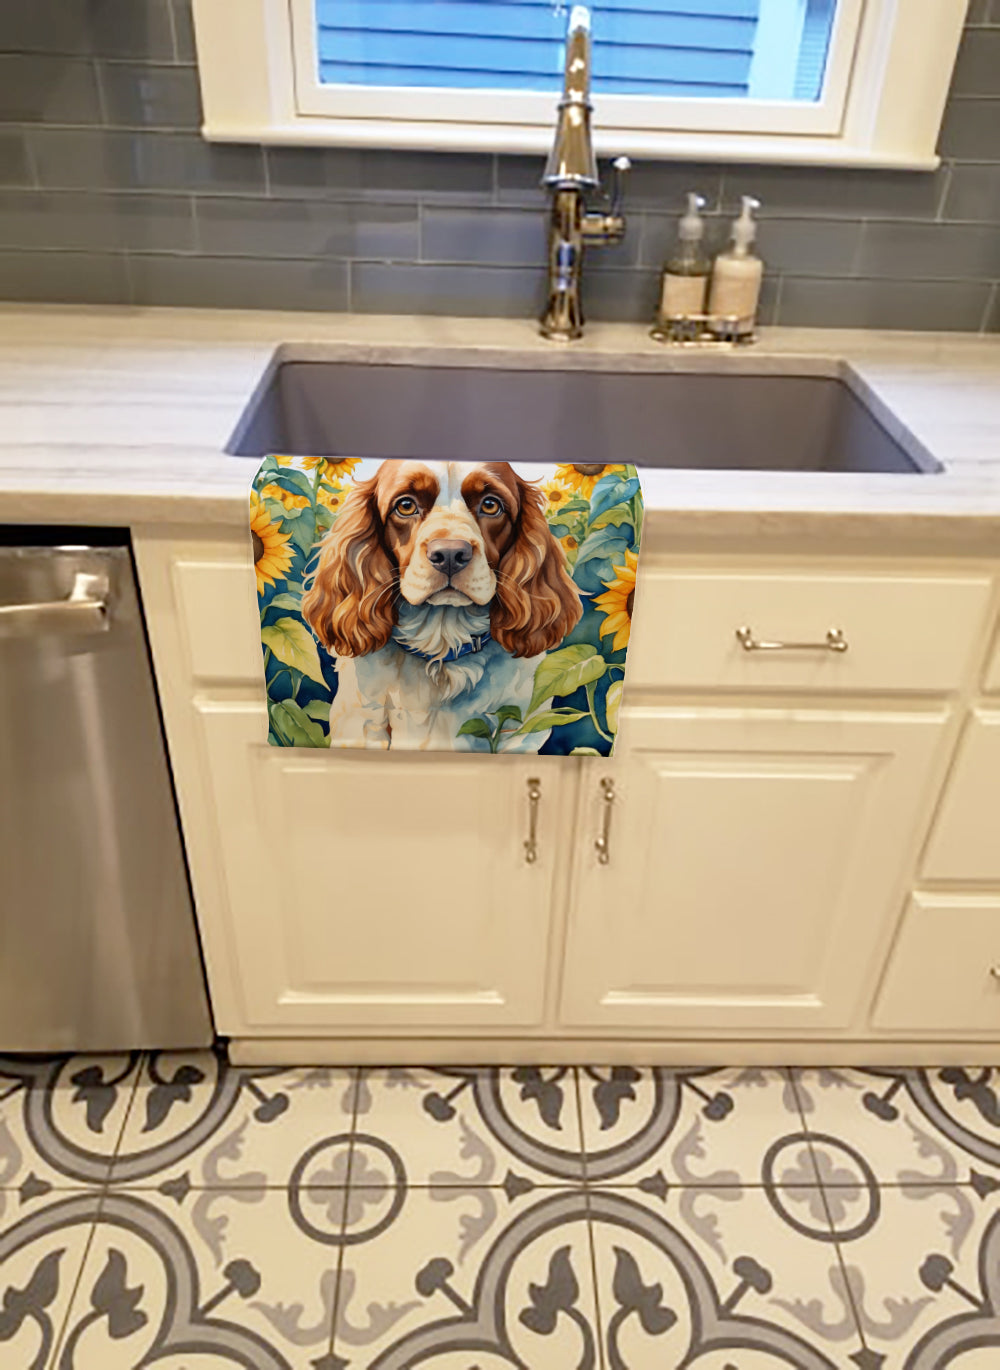 Buy this Cocker Spaniel in Sunflowers Kitchen Towel